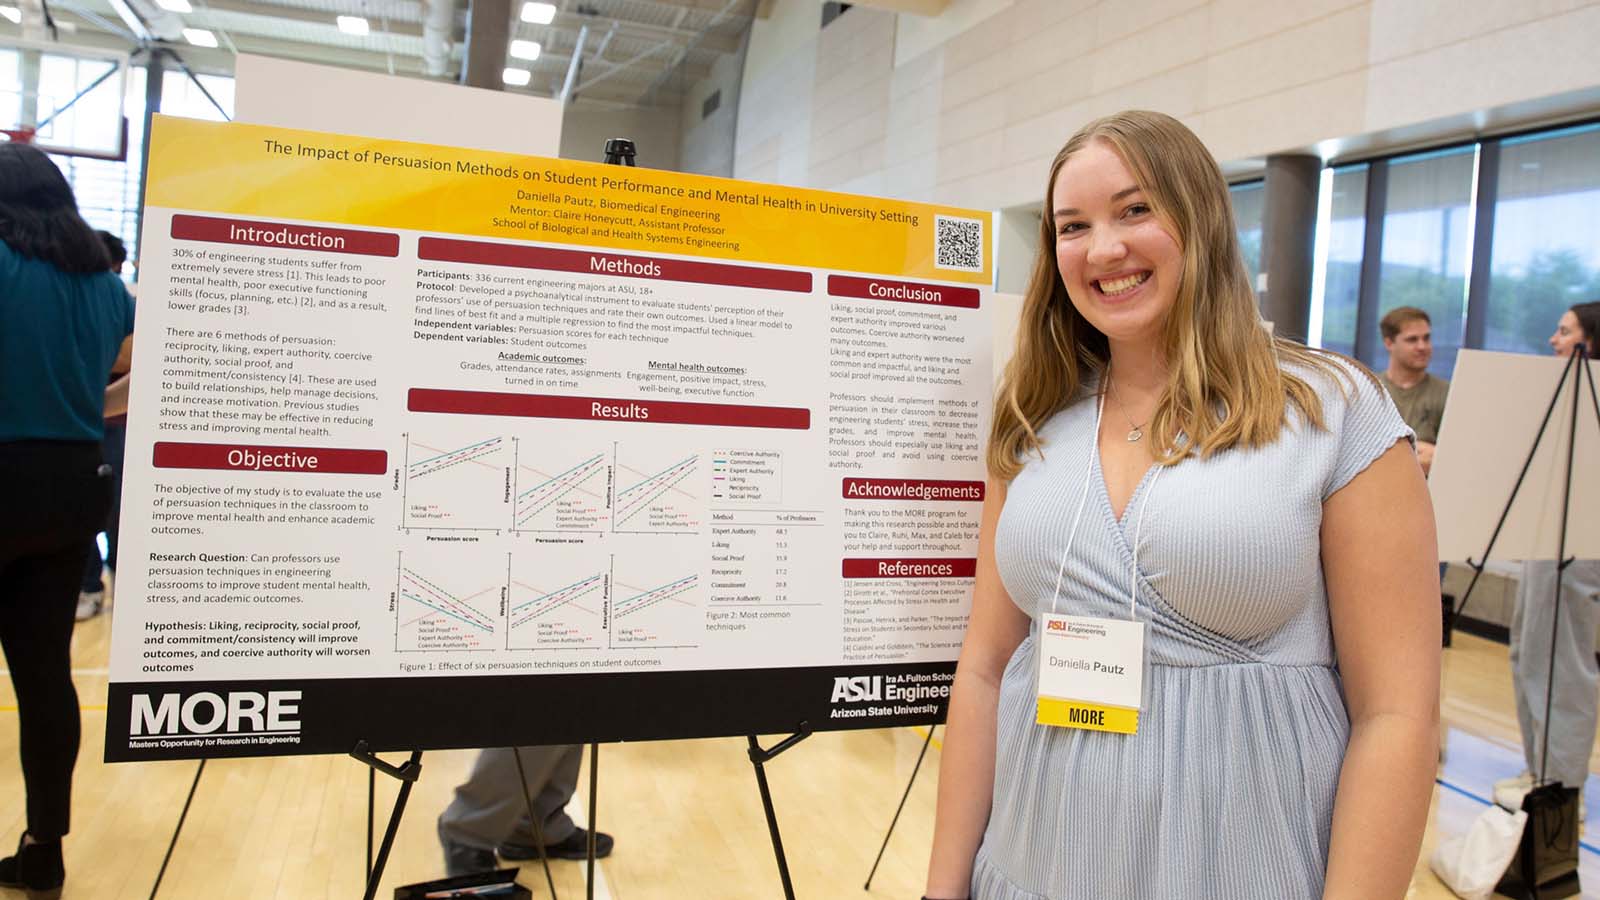 An ASU Engineering graduate student stands next to her presentation poster at a student research event.